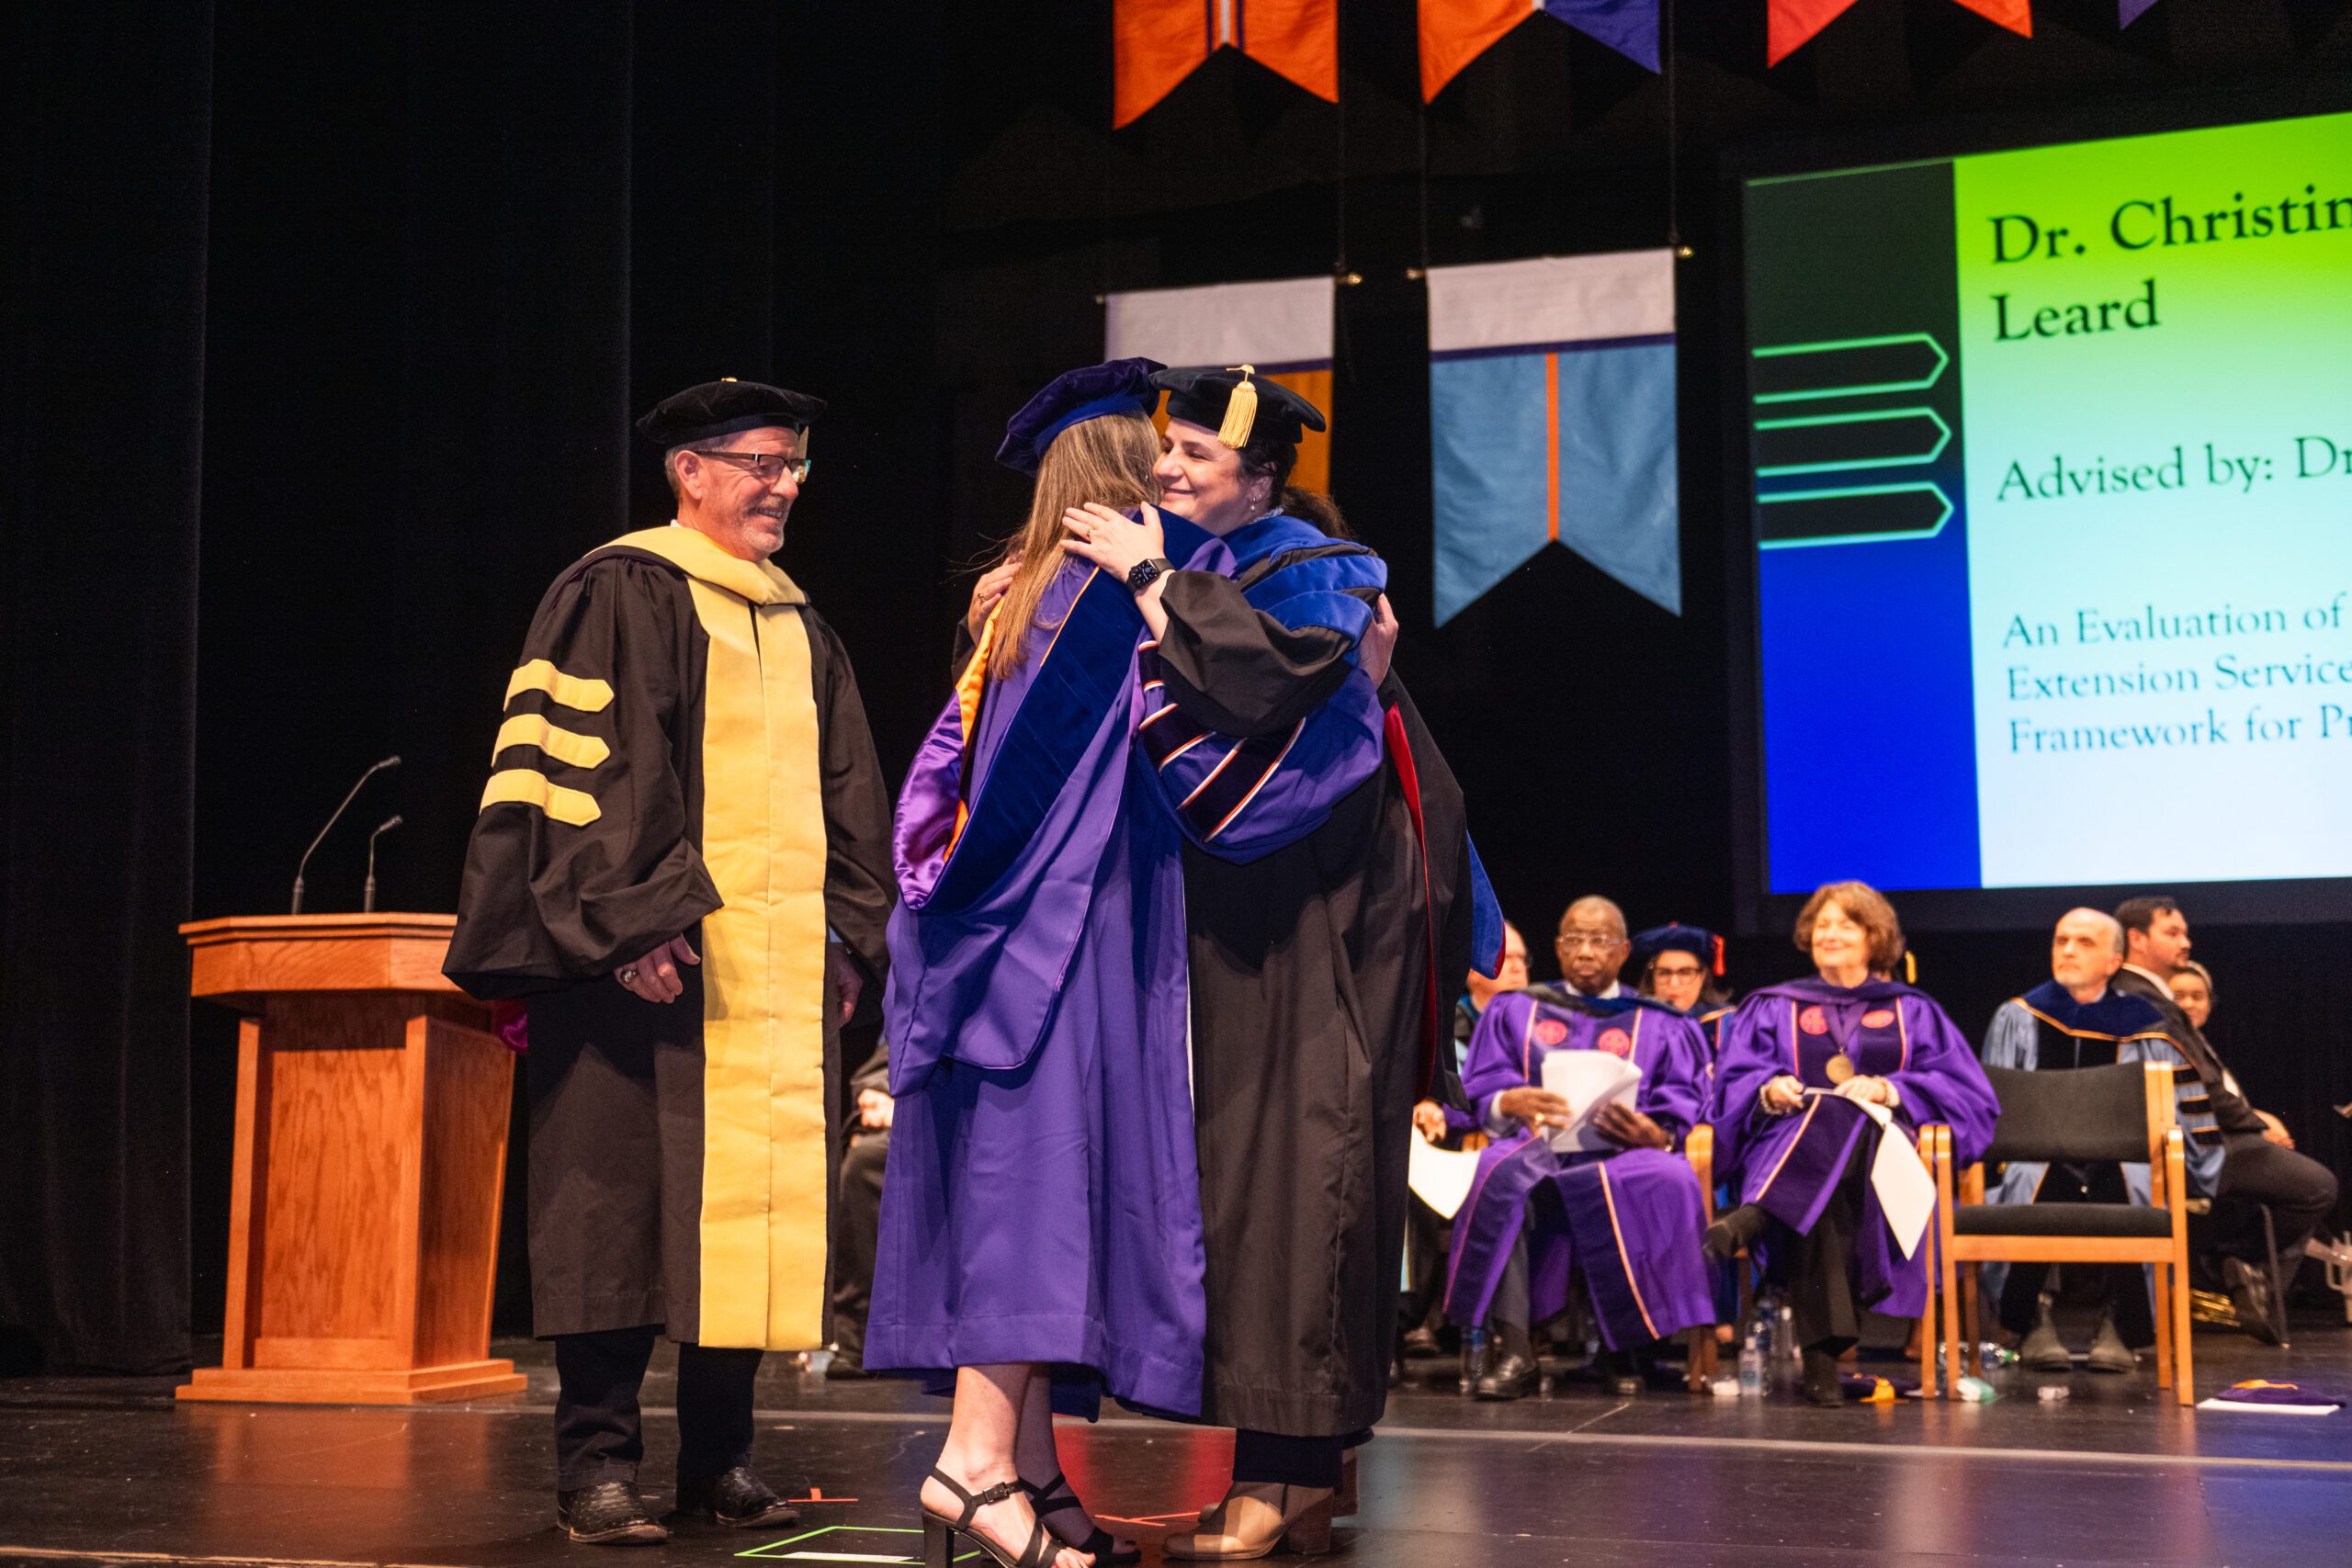 Doctoral graduate is greeted by college leadership on stage